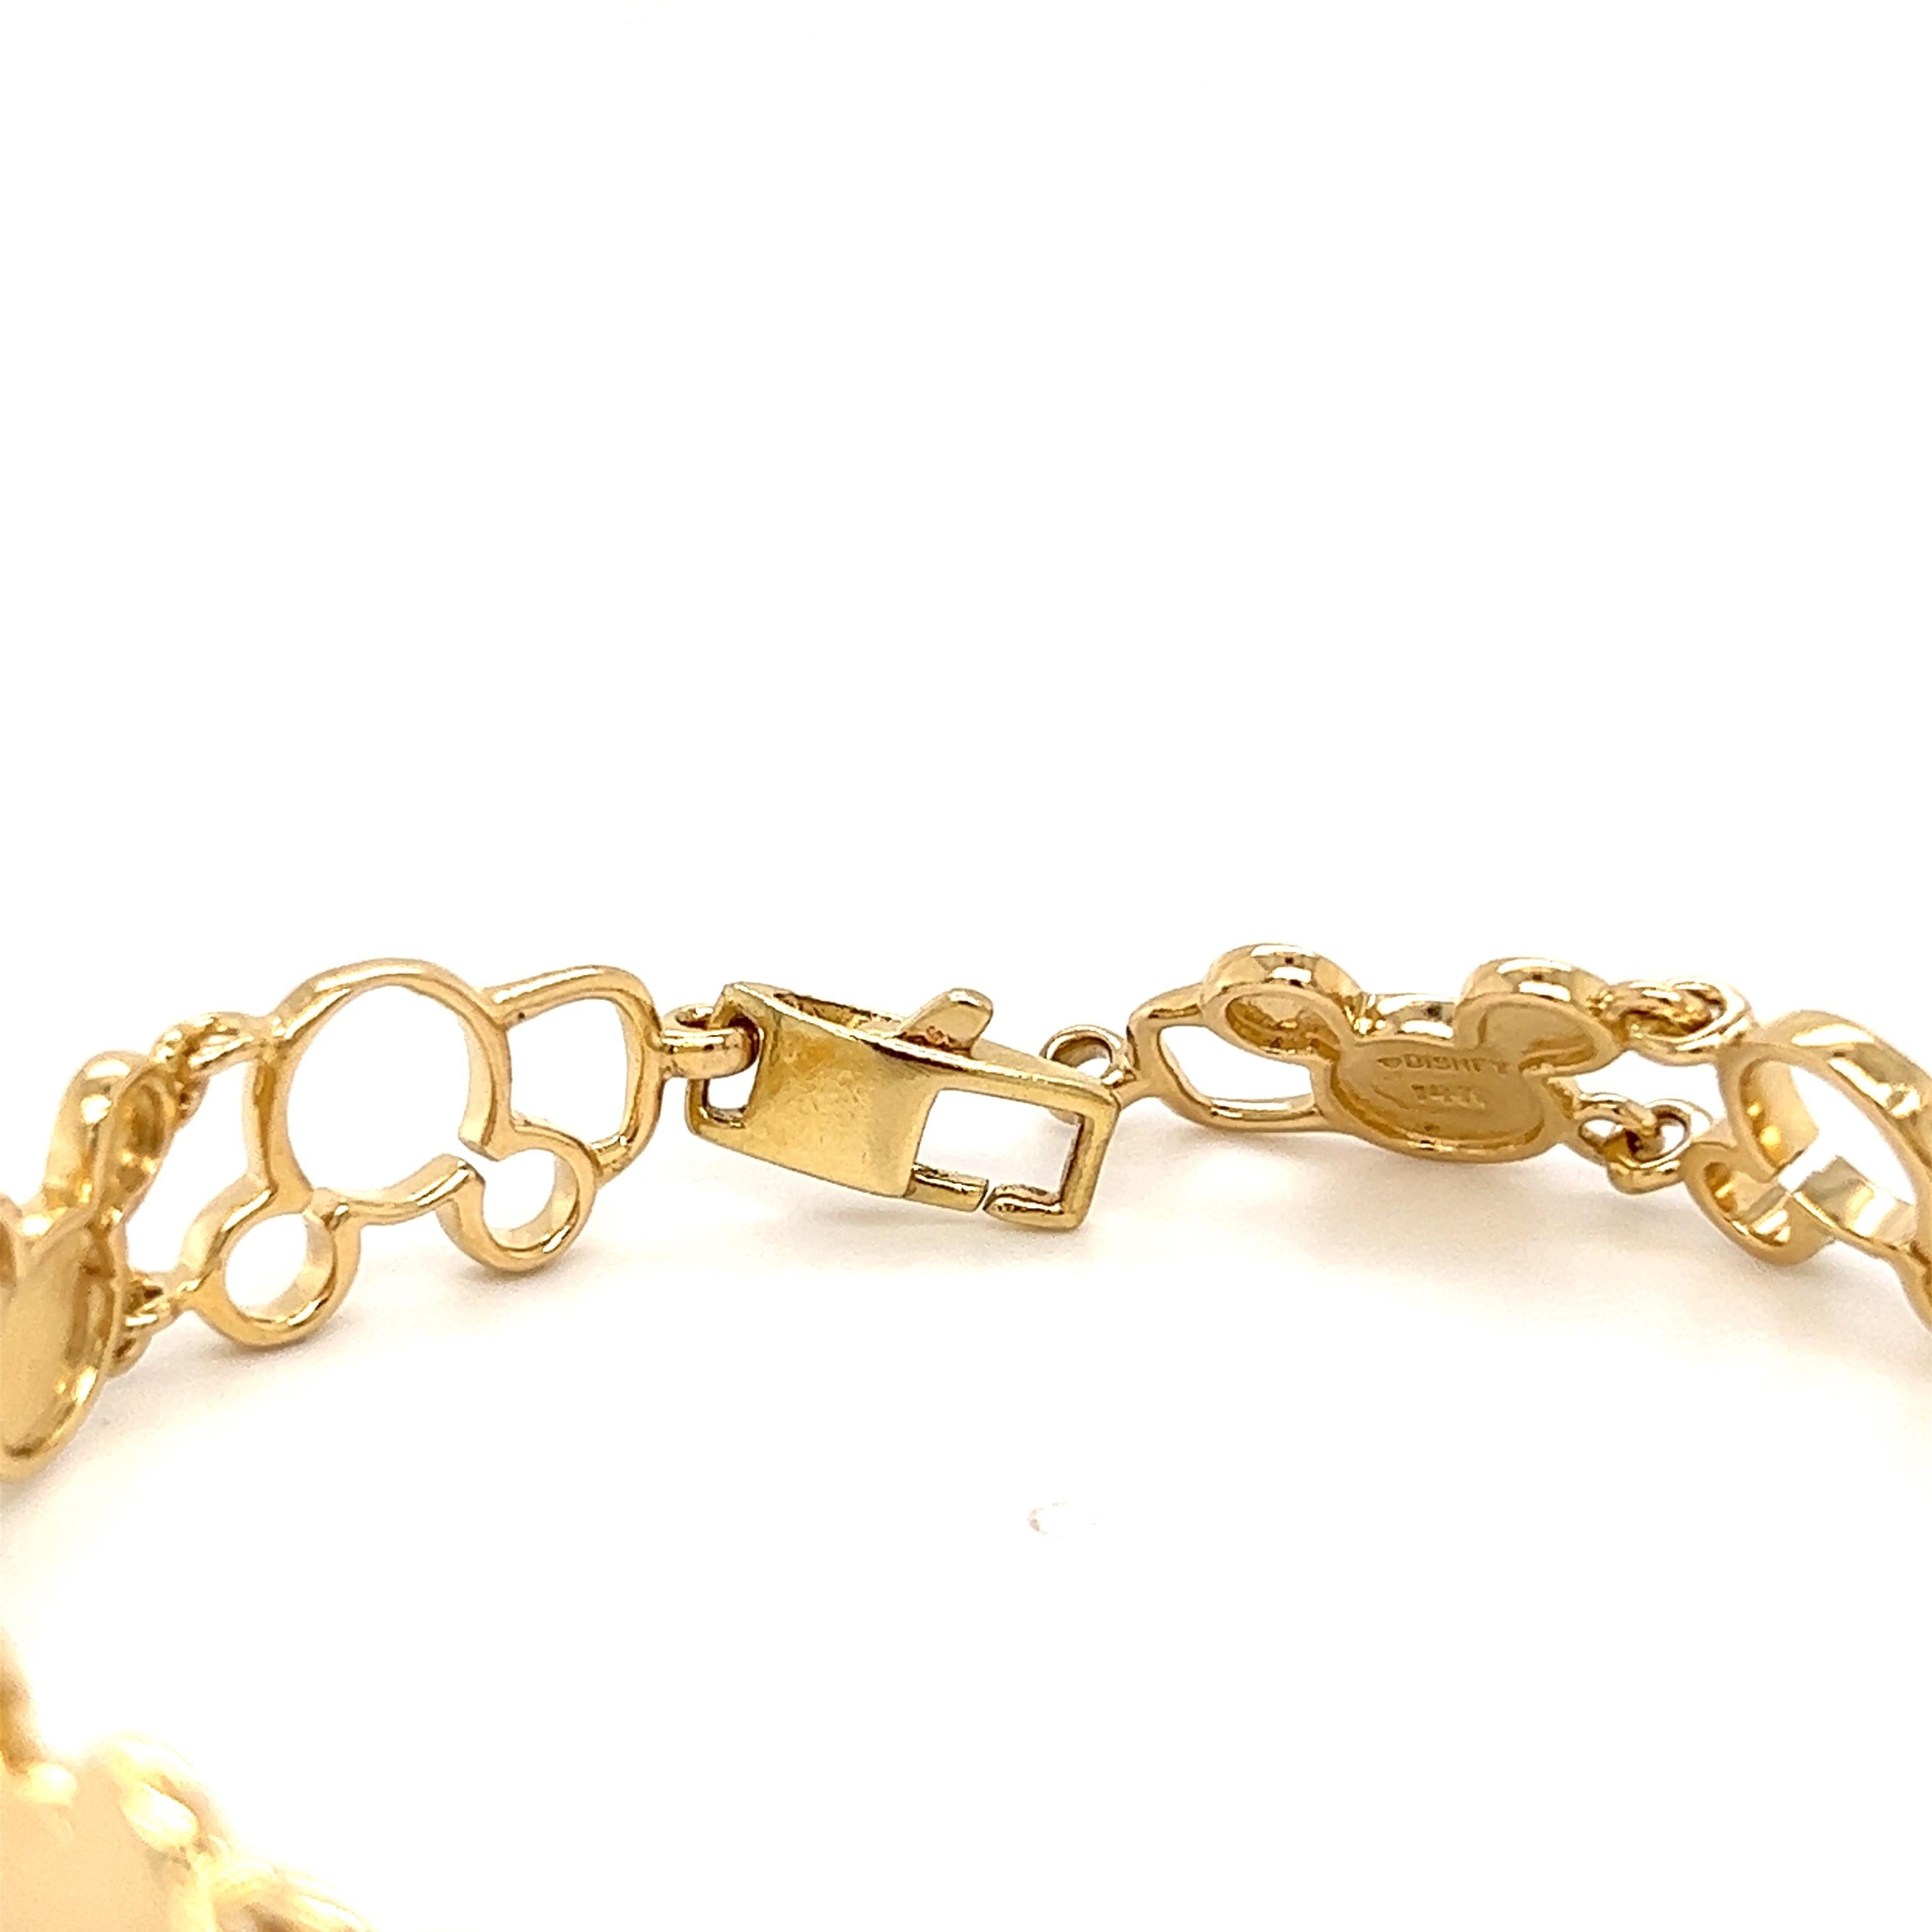 Solid Gold Mickey Mouse Bracelet. Perfect for that Disney enthusiast.

Details:

7.75